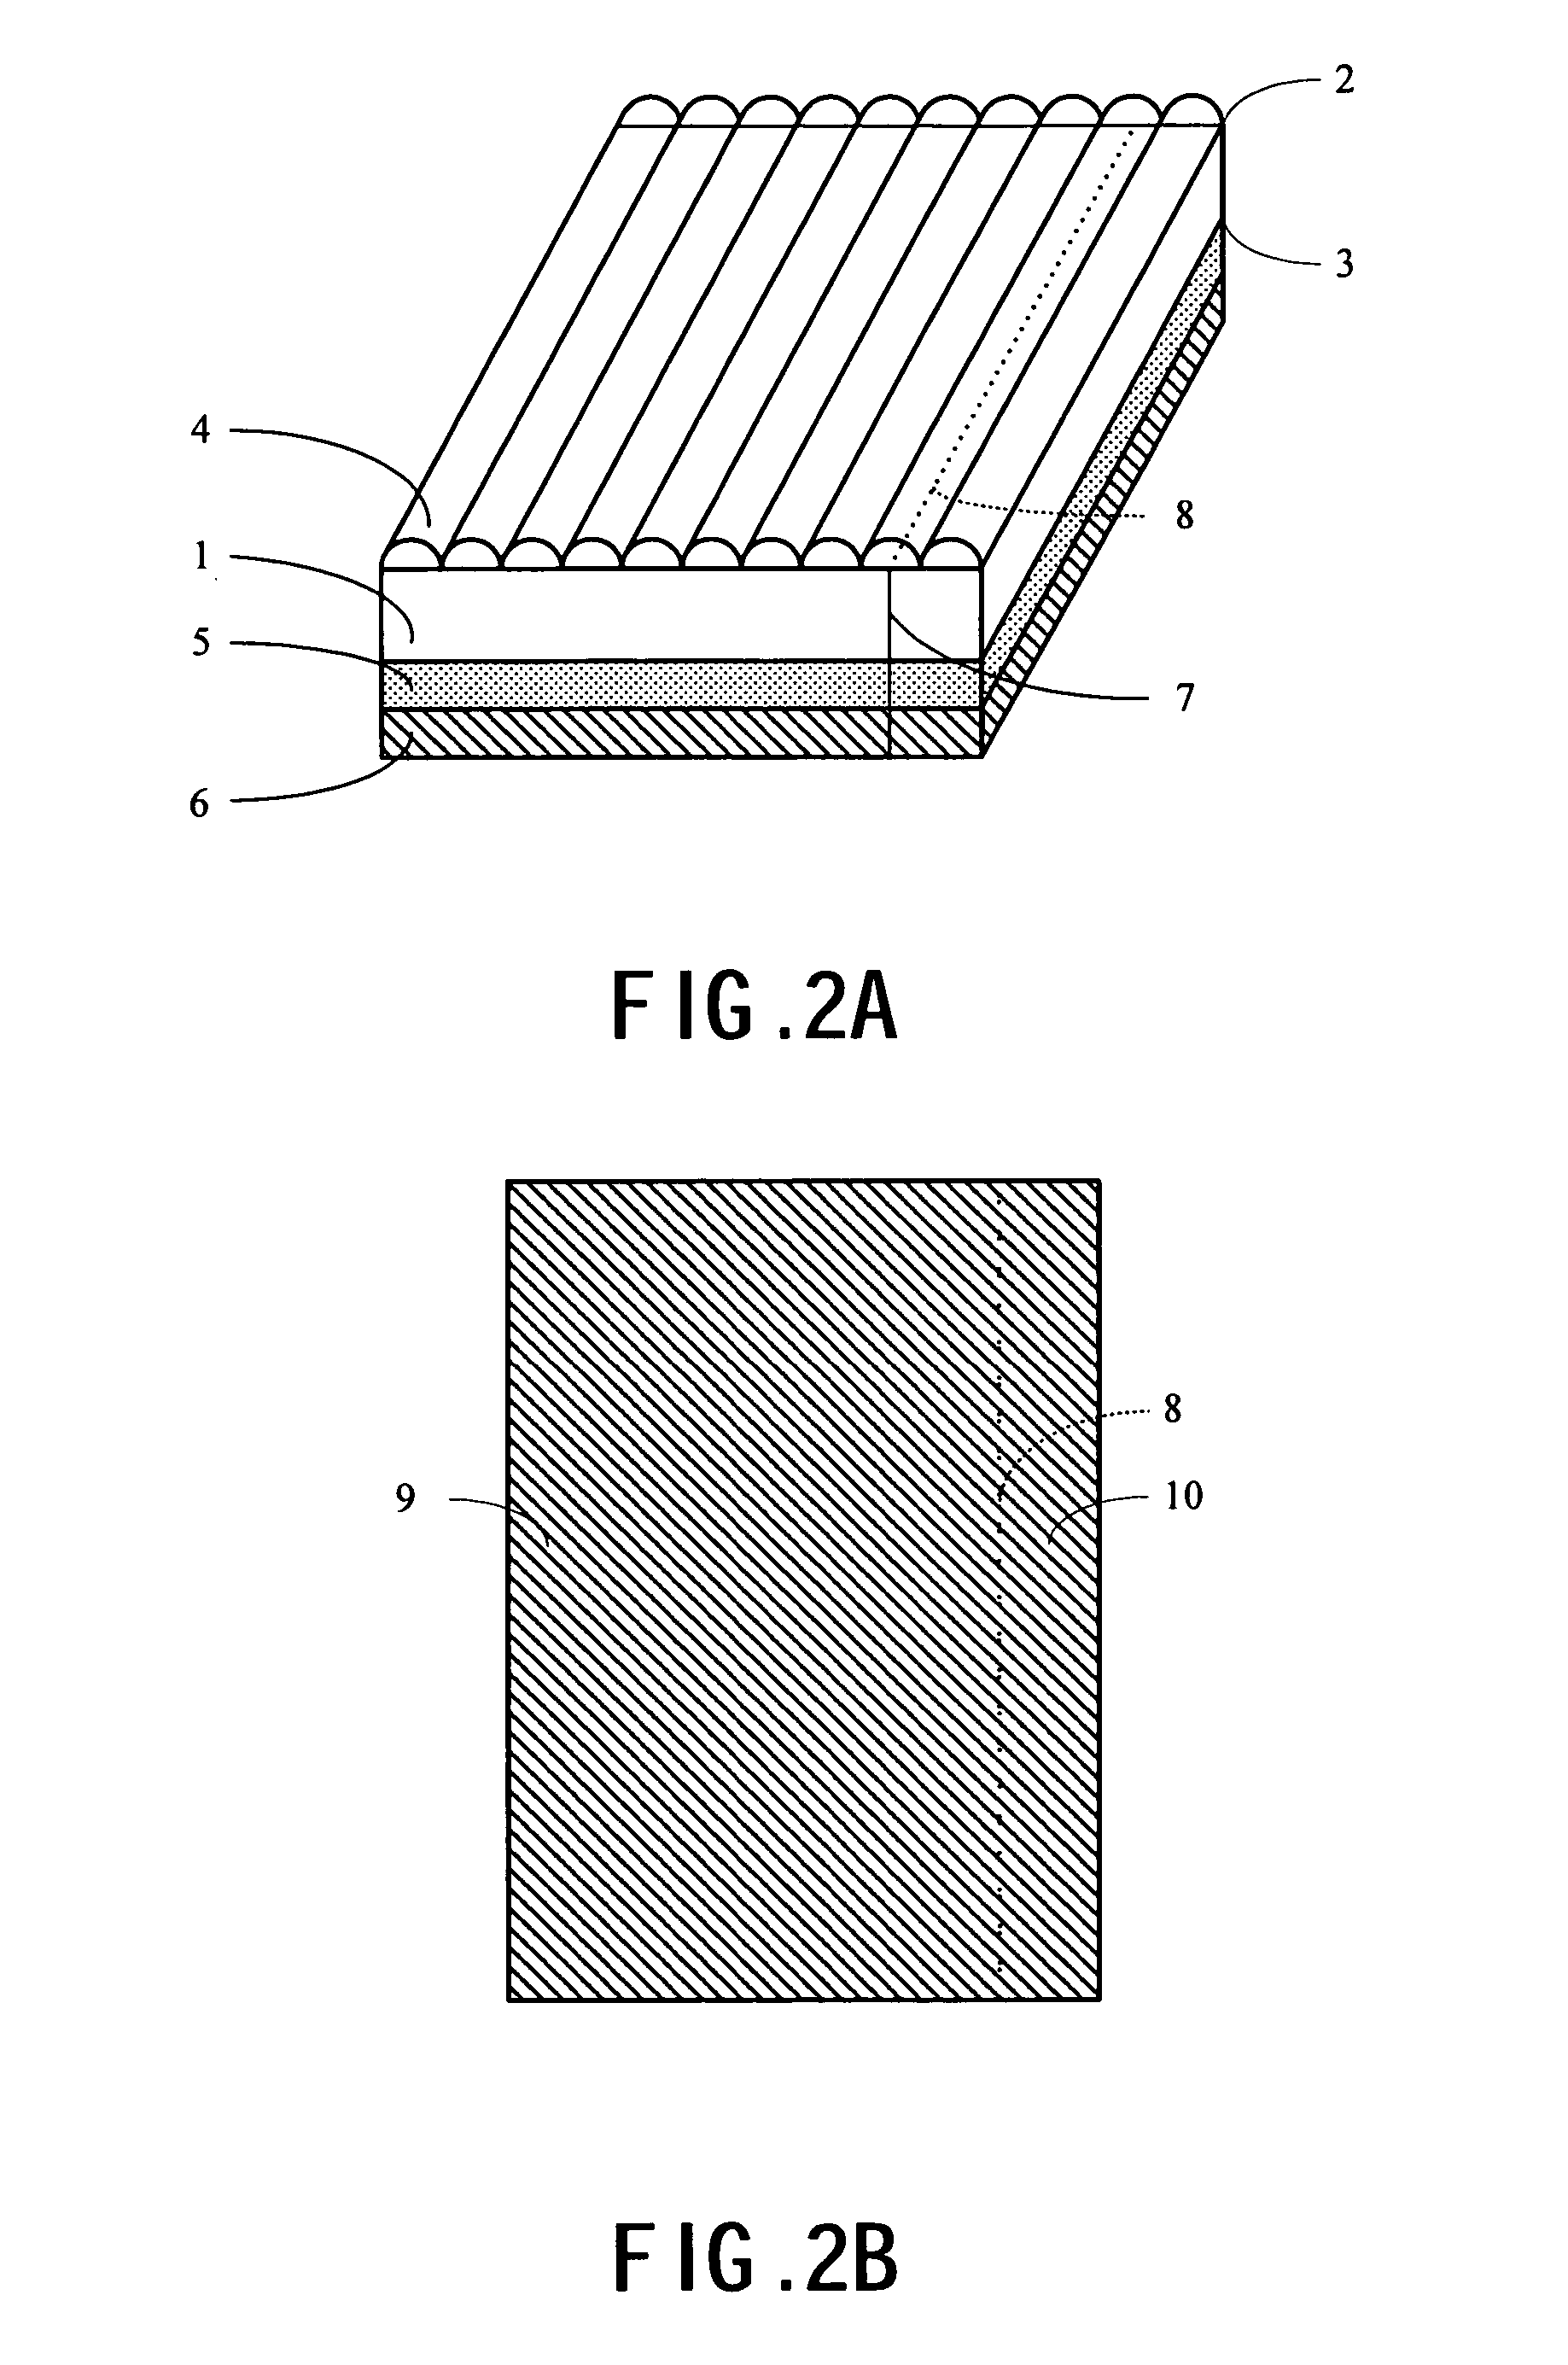 Laminate with optical structure and method for using the same